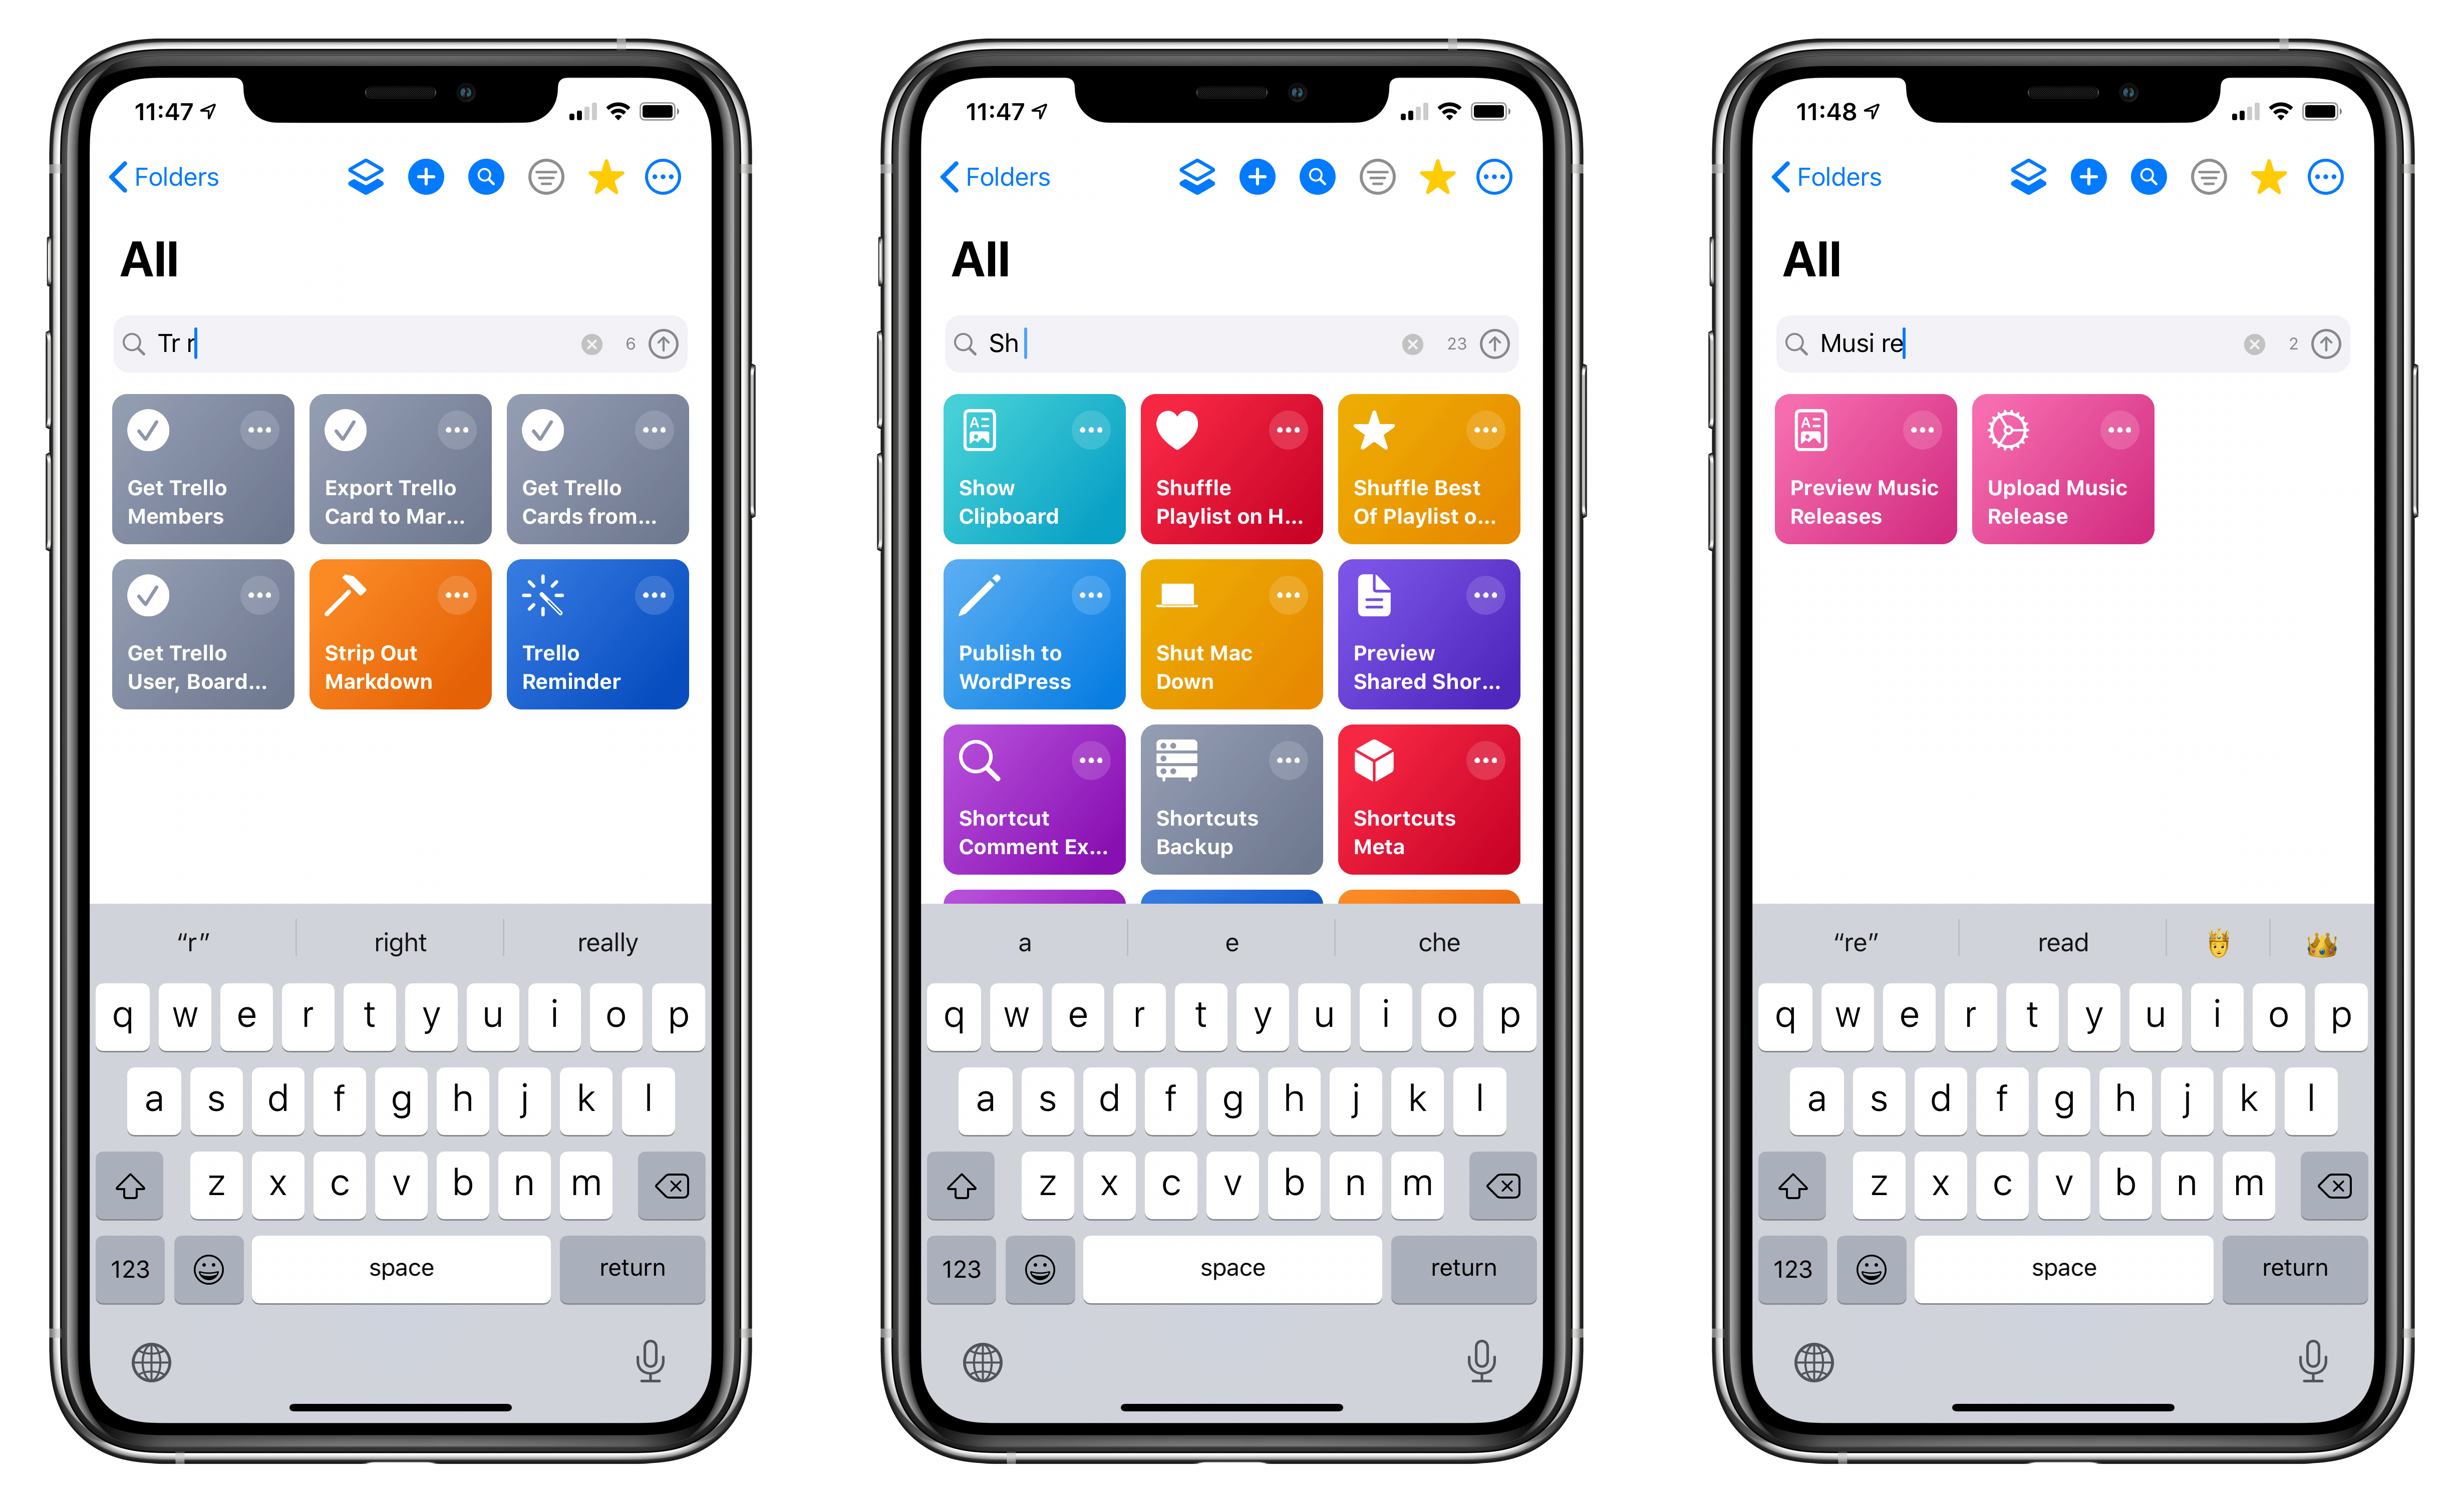 Examples of shortcuts that can be found with LaunchCuts' advanced search feature.